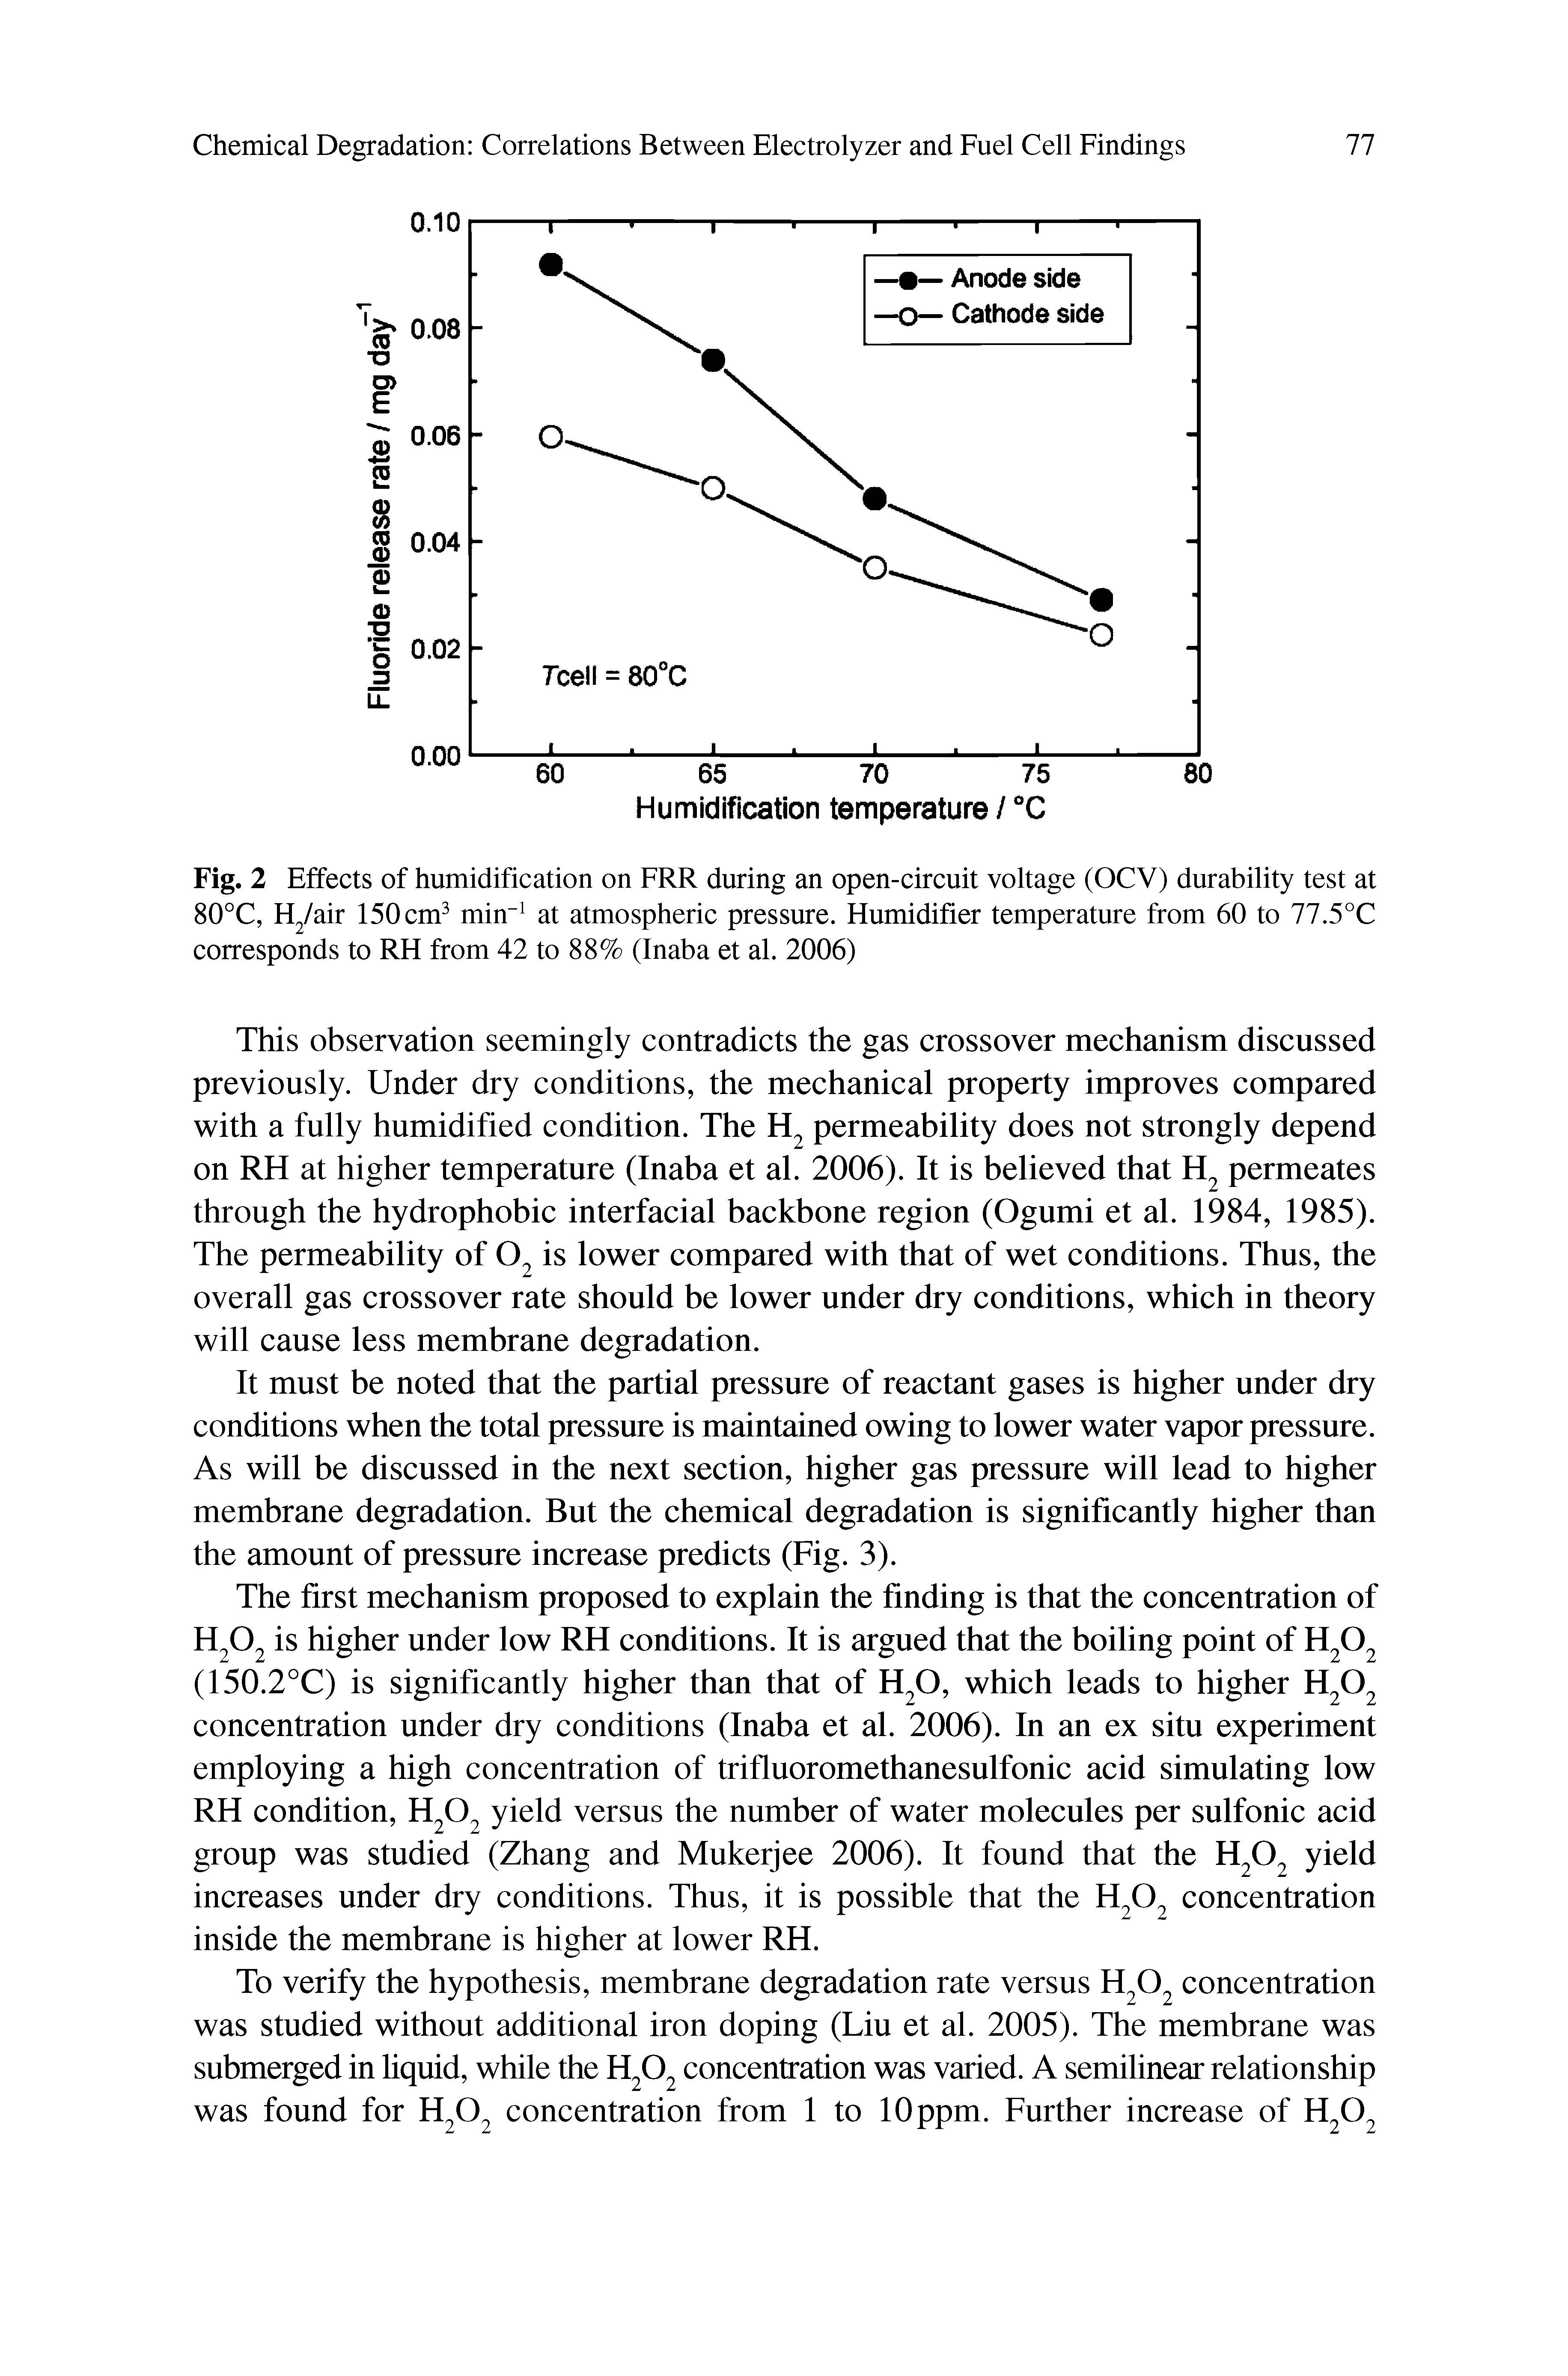 Fig. 2 Effects of humidification on FRR during an open-circuit voltage (OCV) durability test at 80°C, H /air 150cm min at atmospheric pressure. Humidifier temperature from 60 to 77.5°C corresponds to RH from 42 to 88% (Inaba et al. 2006)...